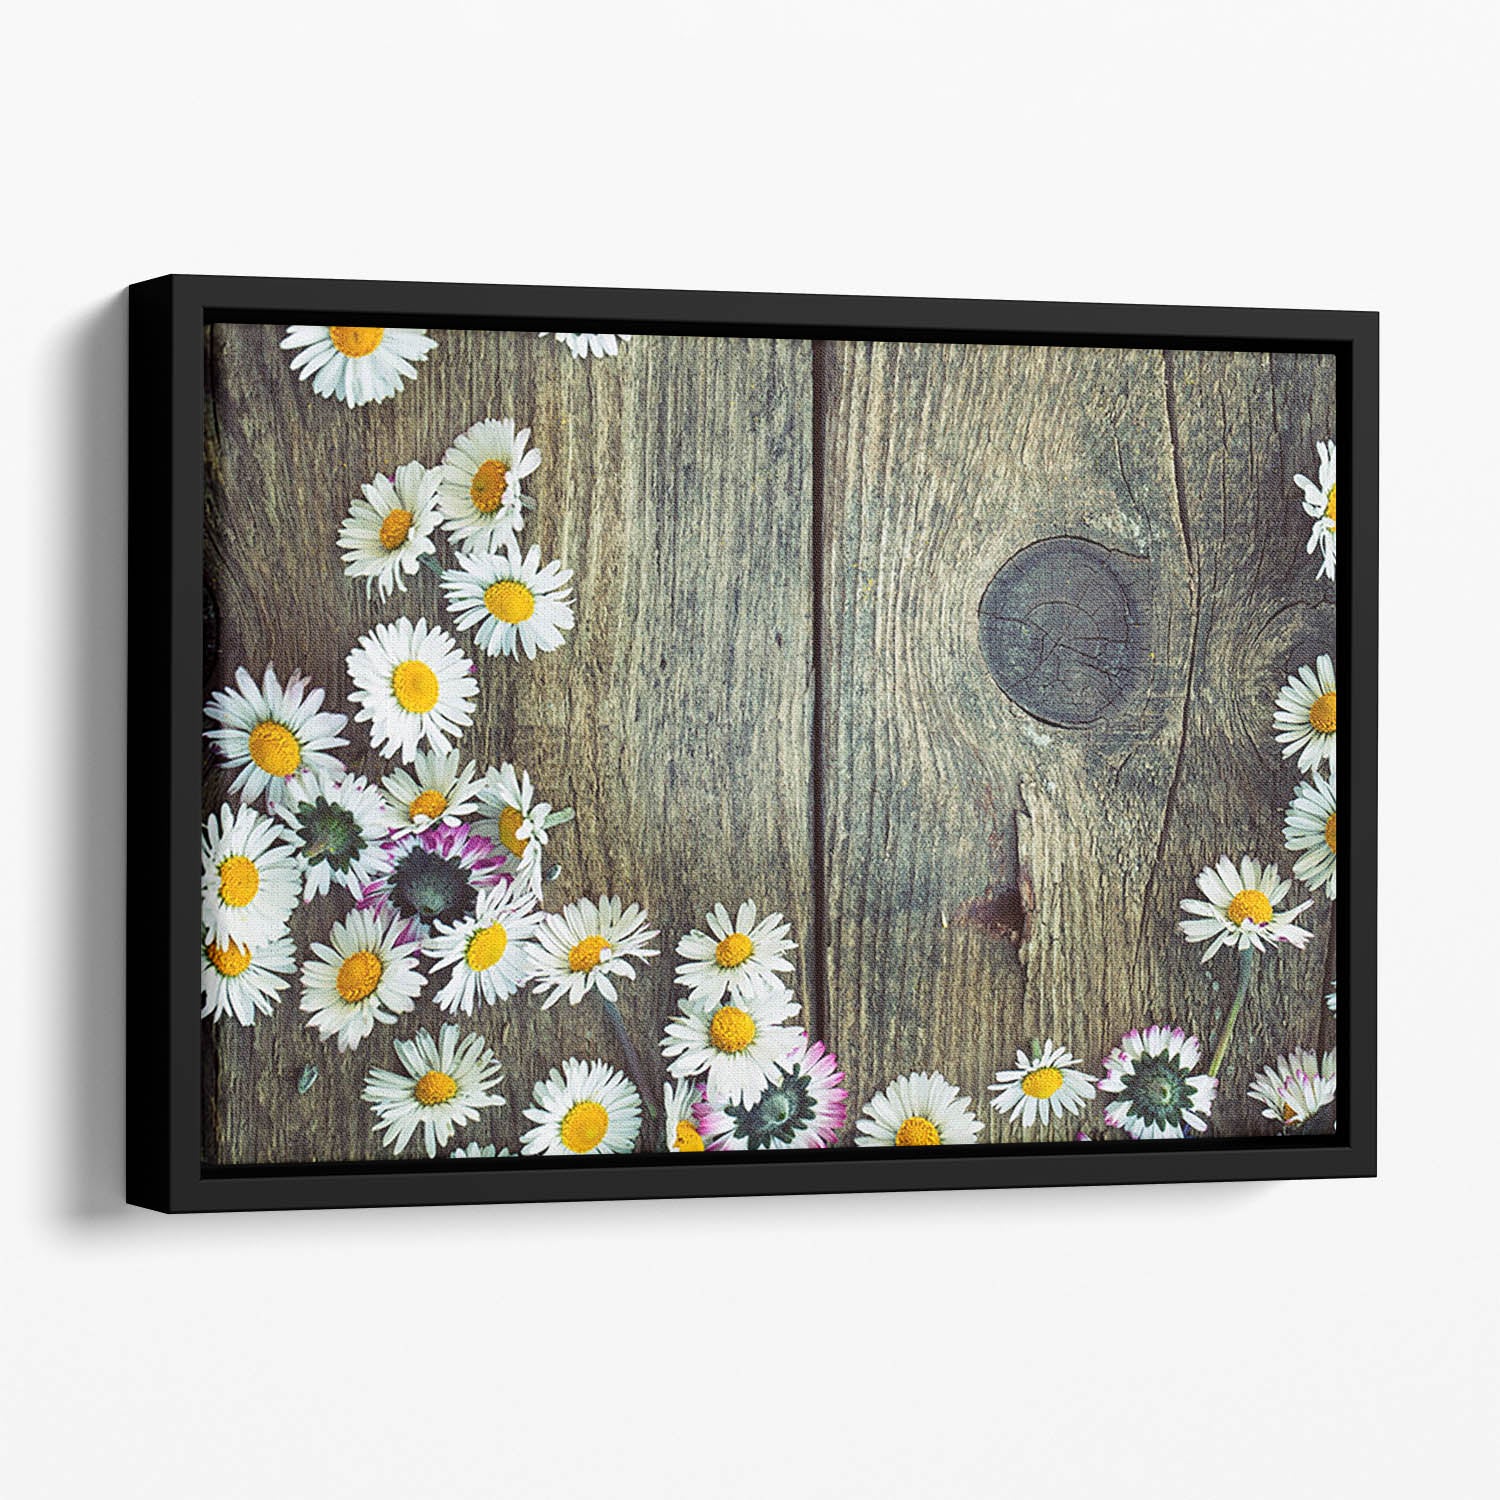 Fresh daisies on wood Floating Framed Canvas